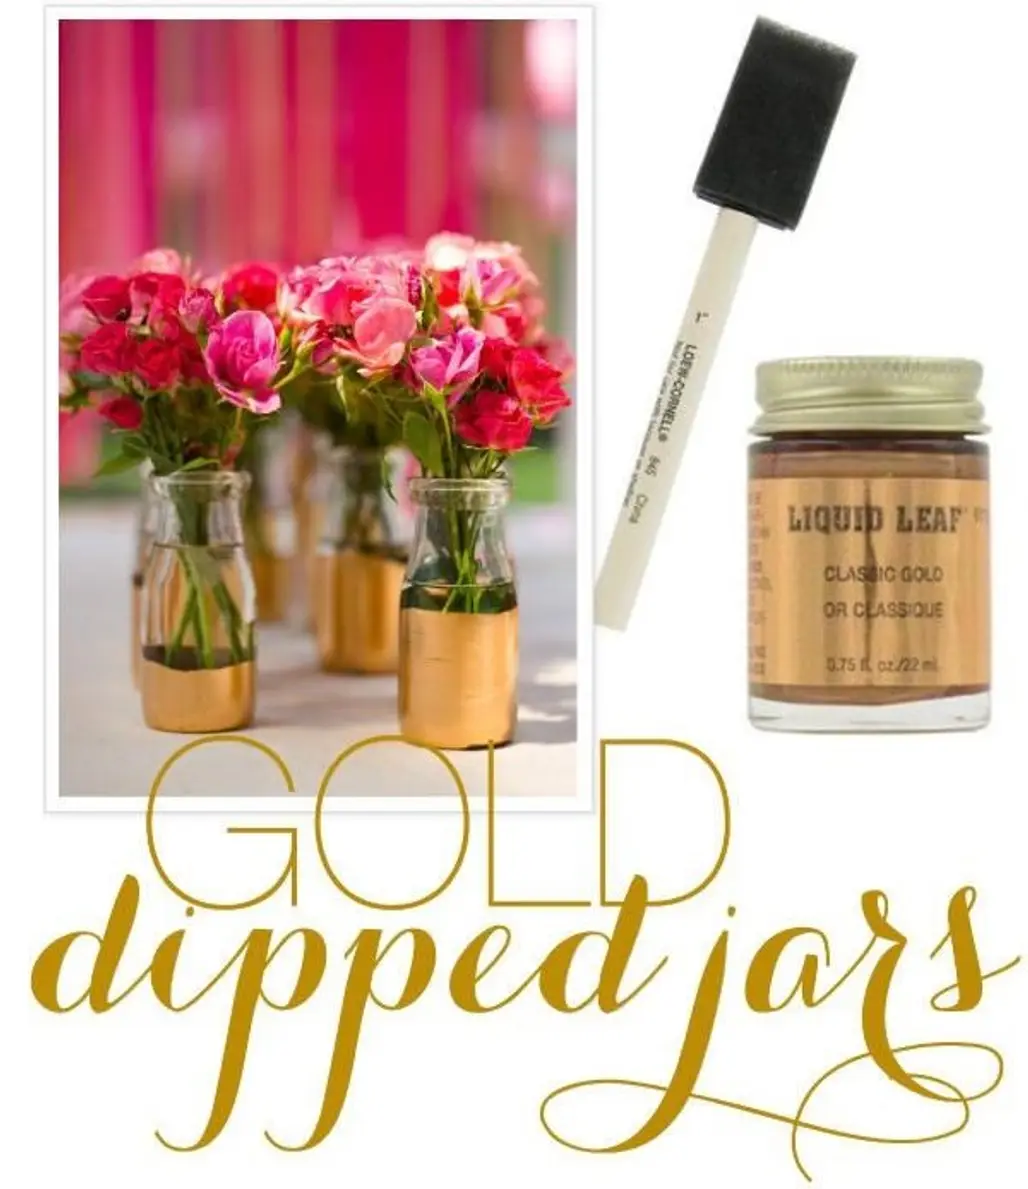 Gold-Dipped Jars/Vases